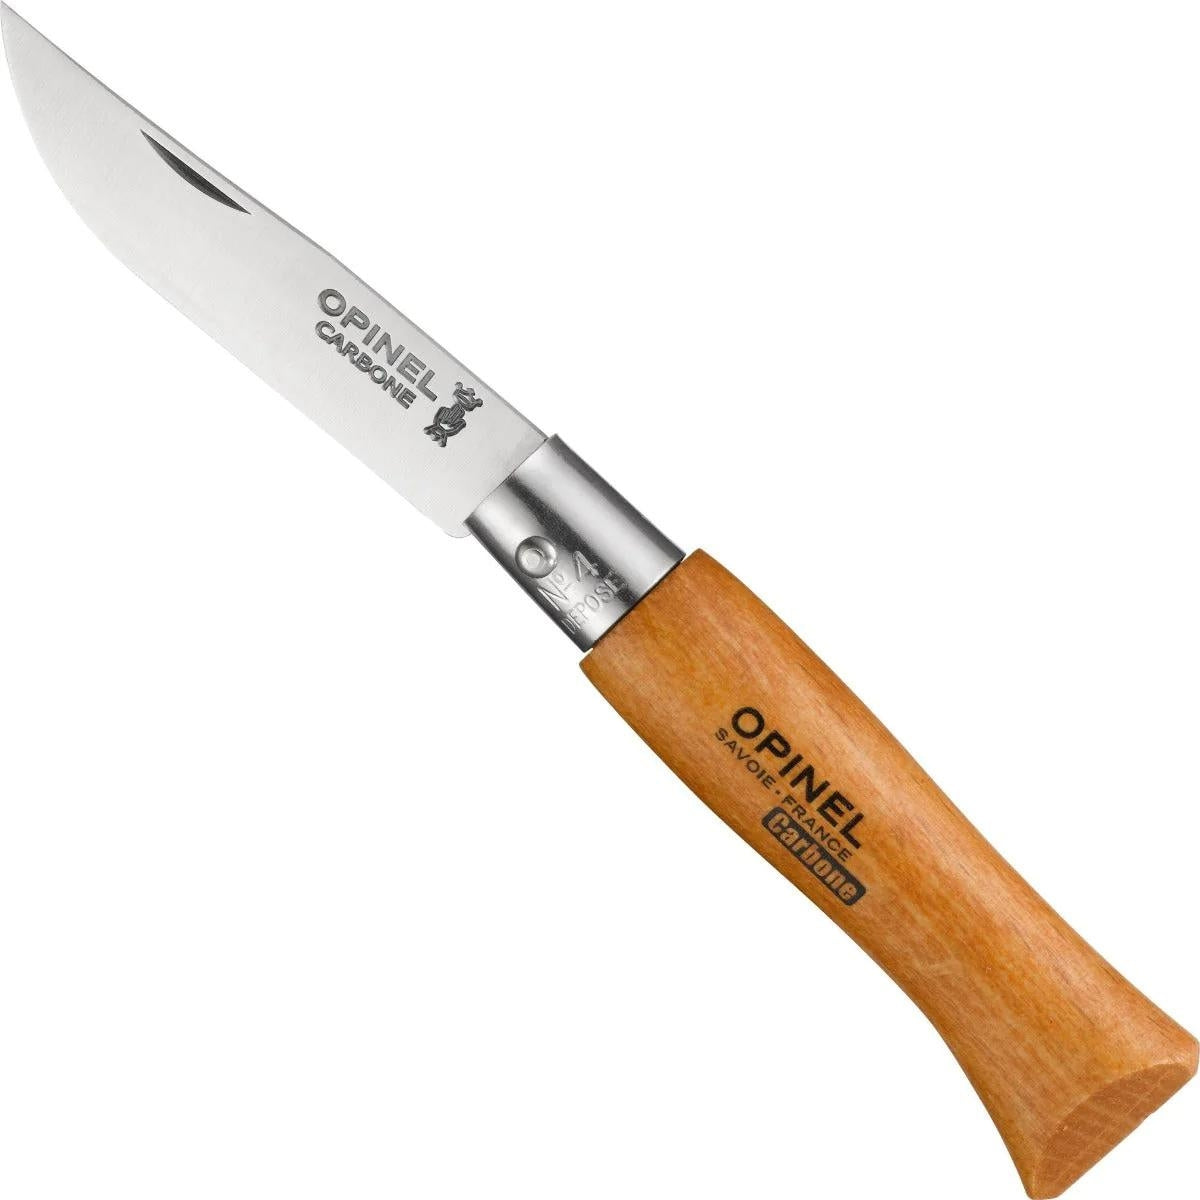 Opinel #12 knife review 